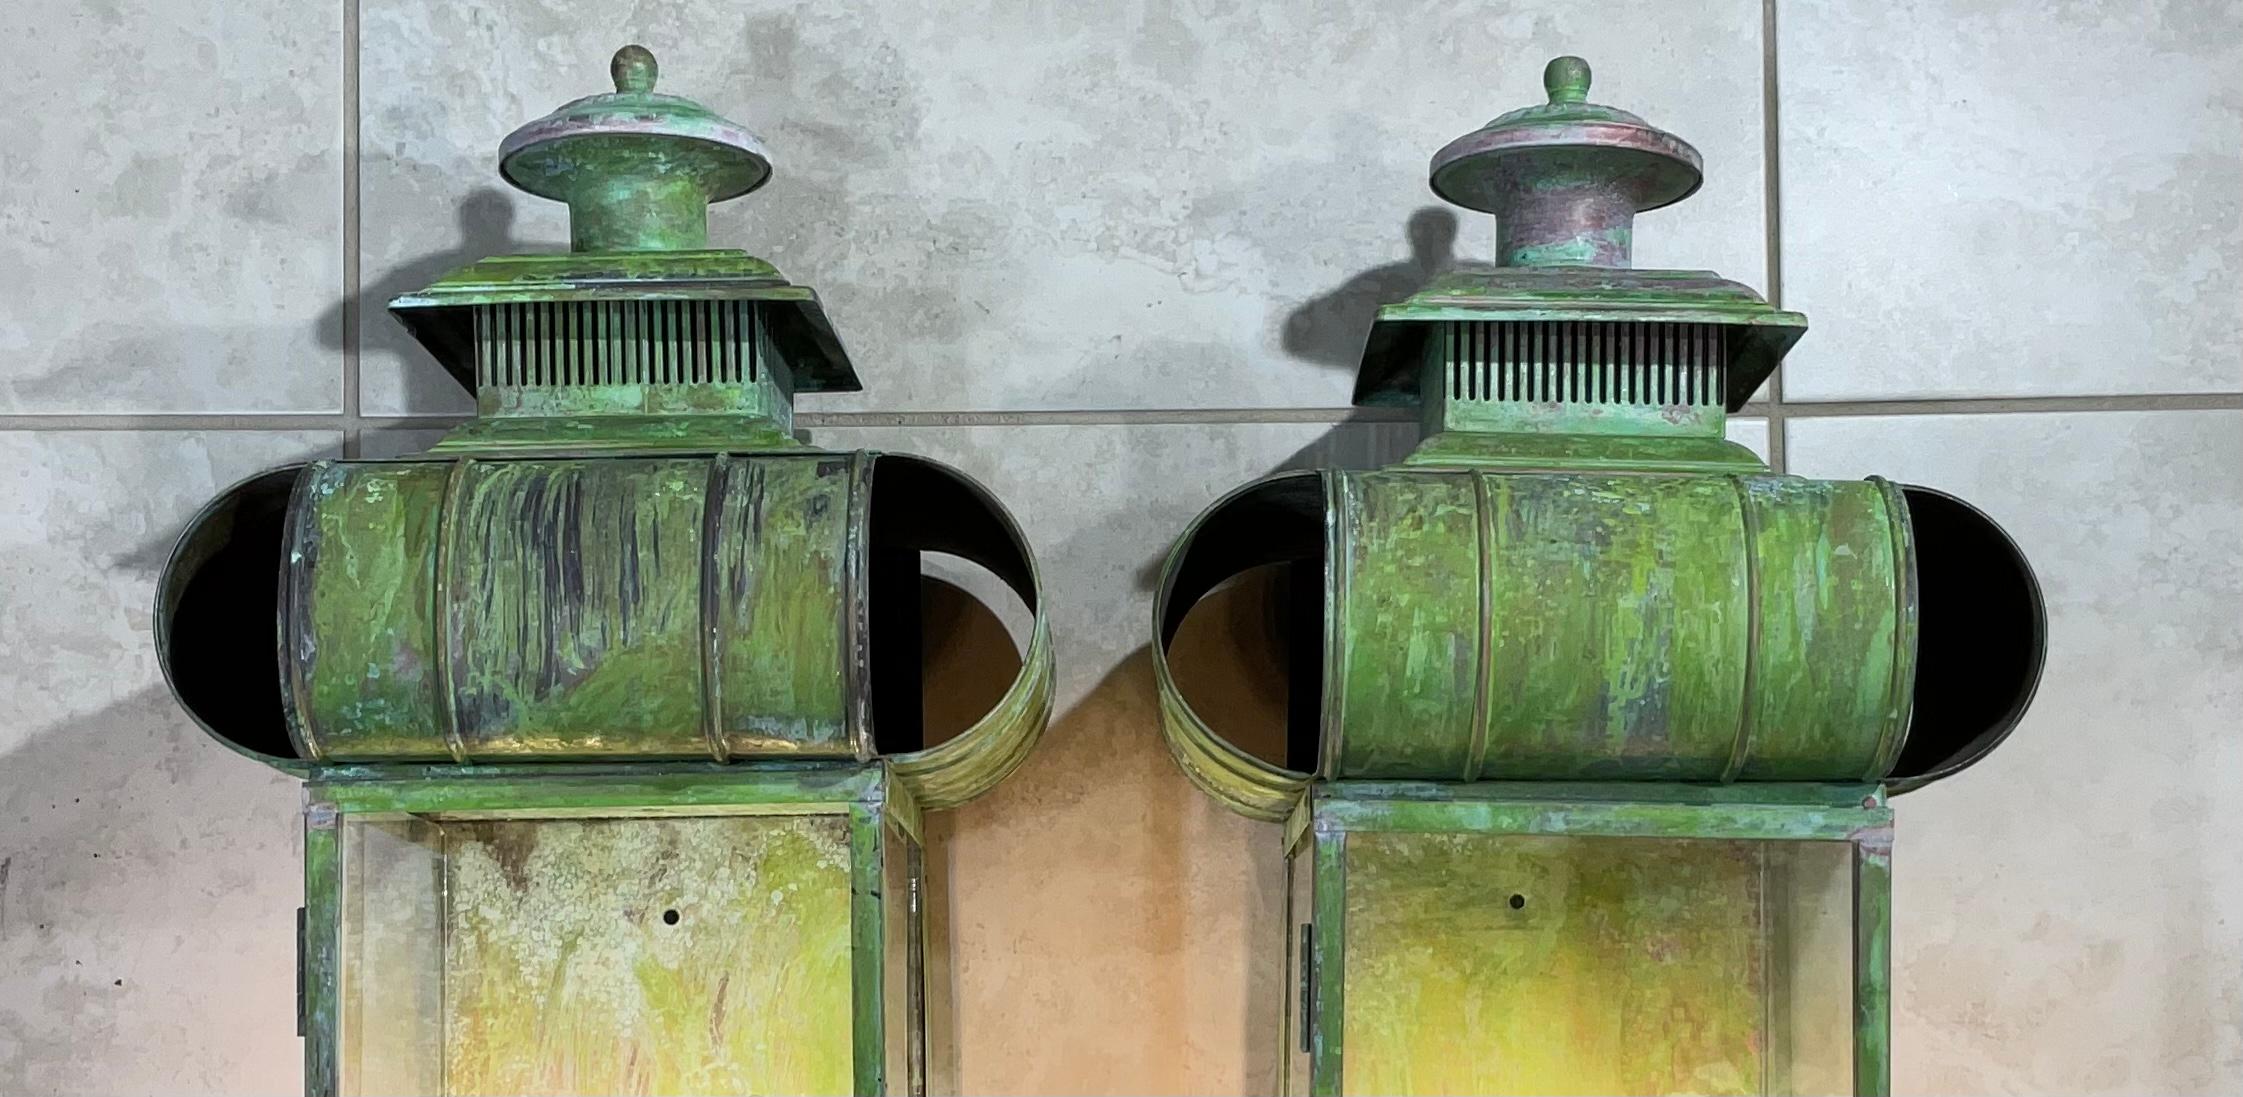 Pair of wall lantern or wall sconces, made of solid copper, beautiful patina, two 60/watt lights each lantern,
Suitable for wet locations, 
Great looking wall lanterns for any entrance.